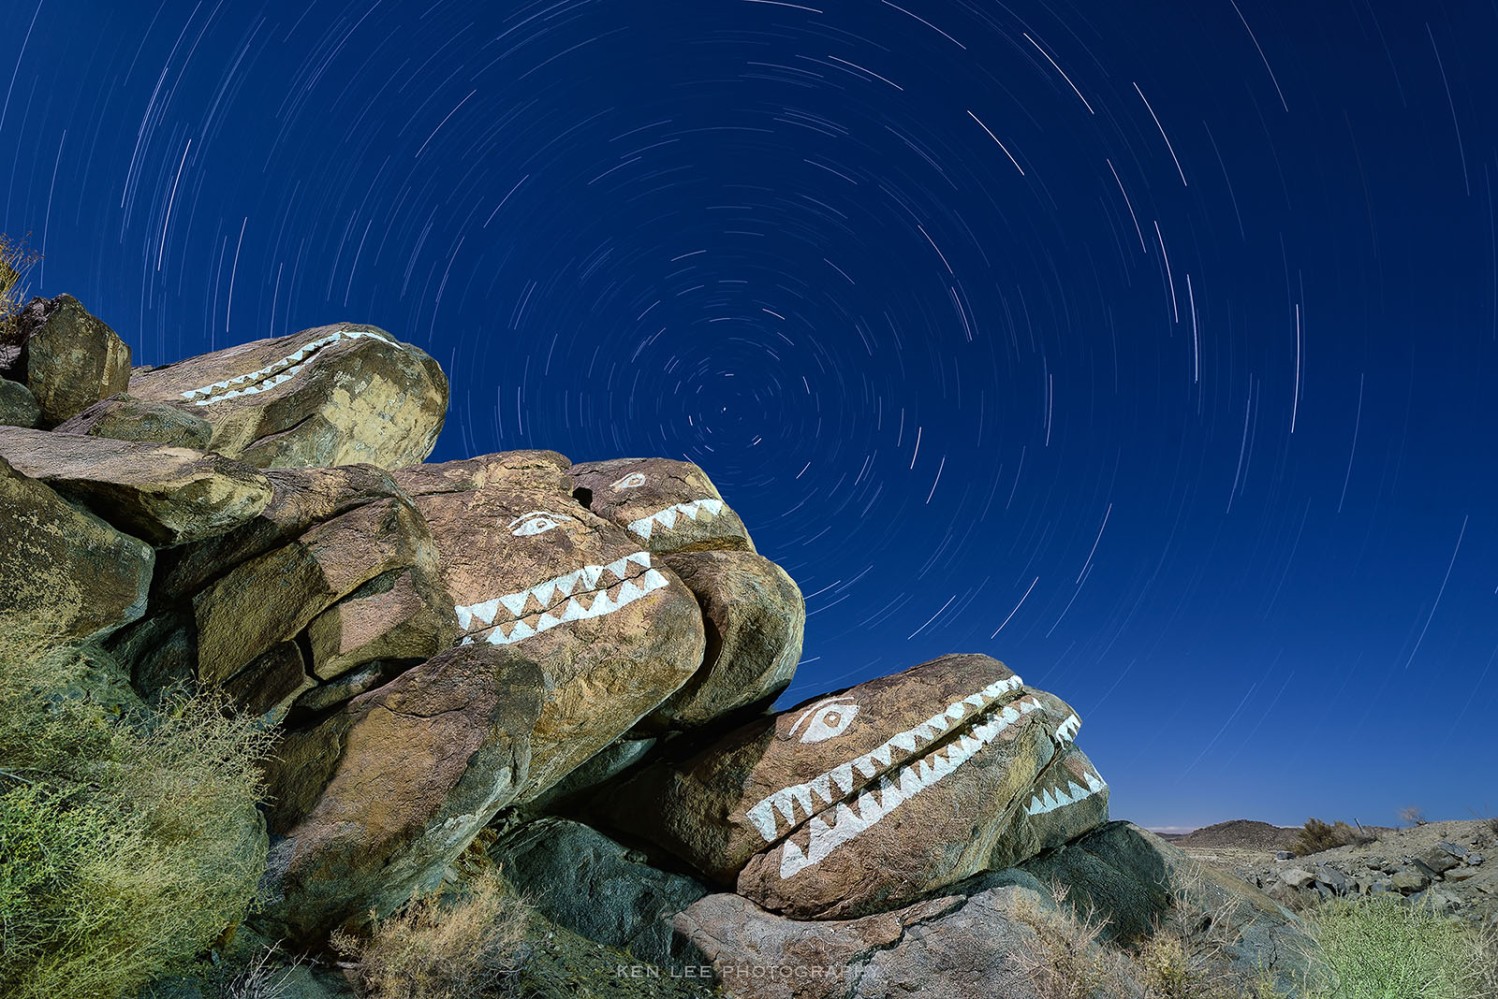 Fish heads, fish heads, roly poly fish heads. This is a long exposure night photo showing the celestial movements over a long period of time.